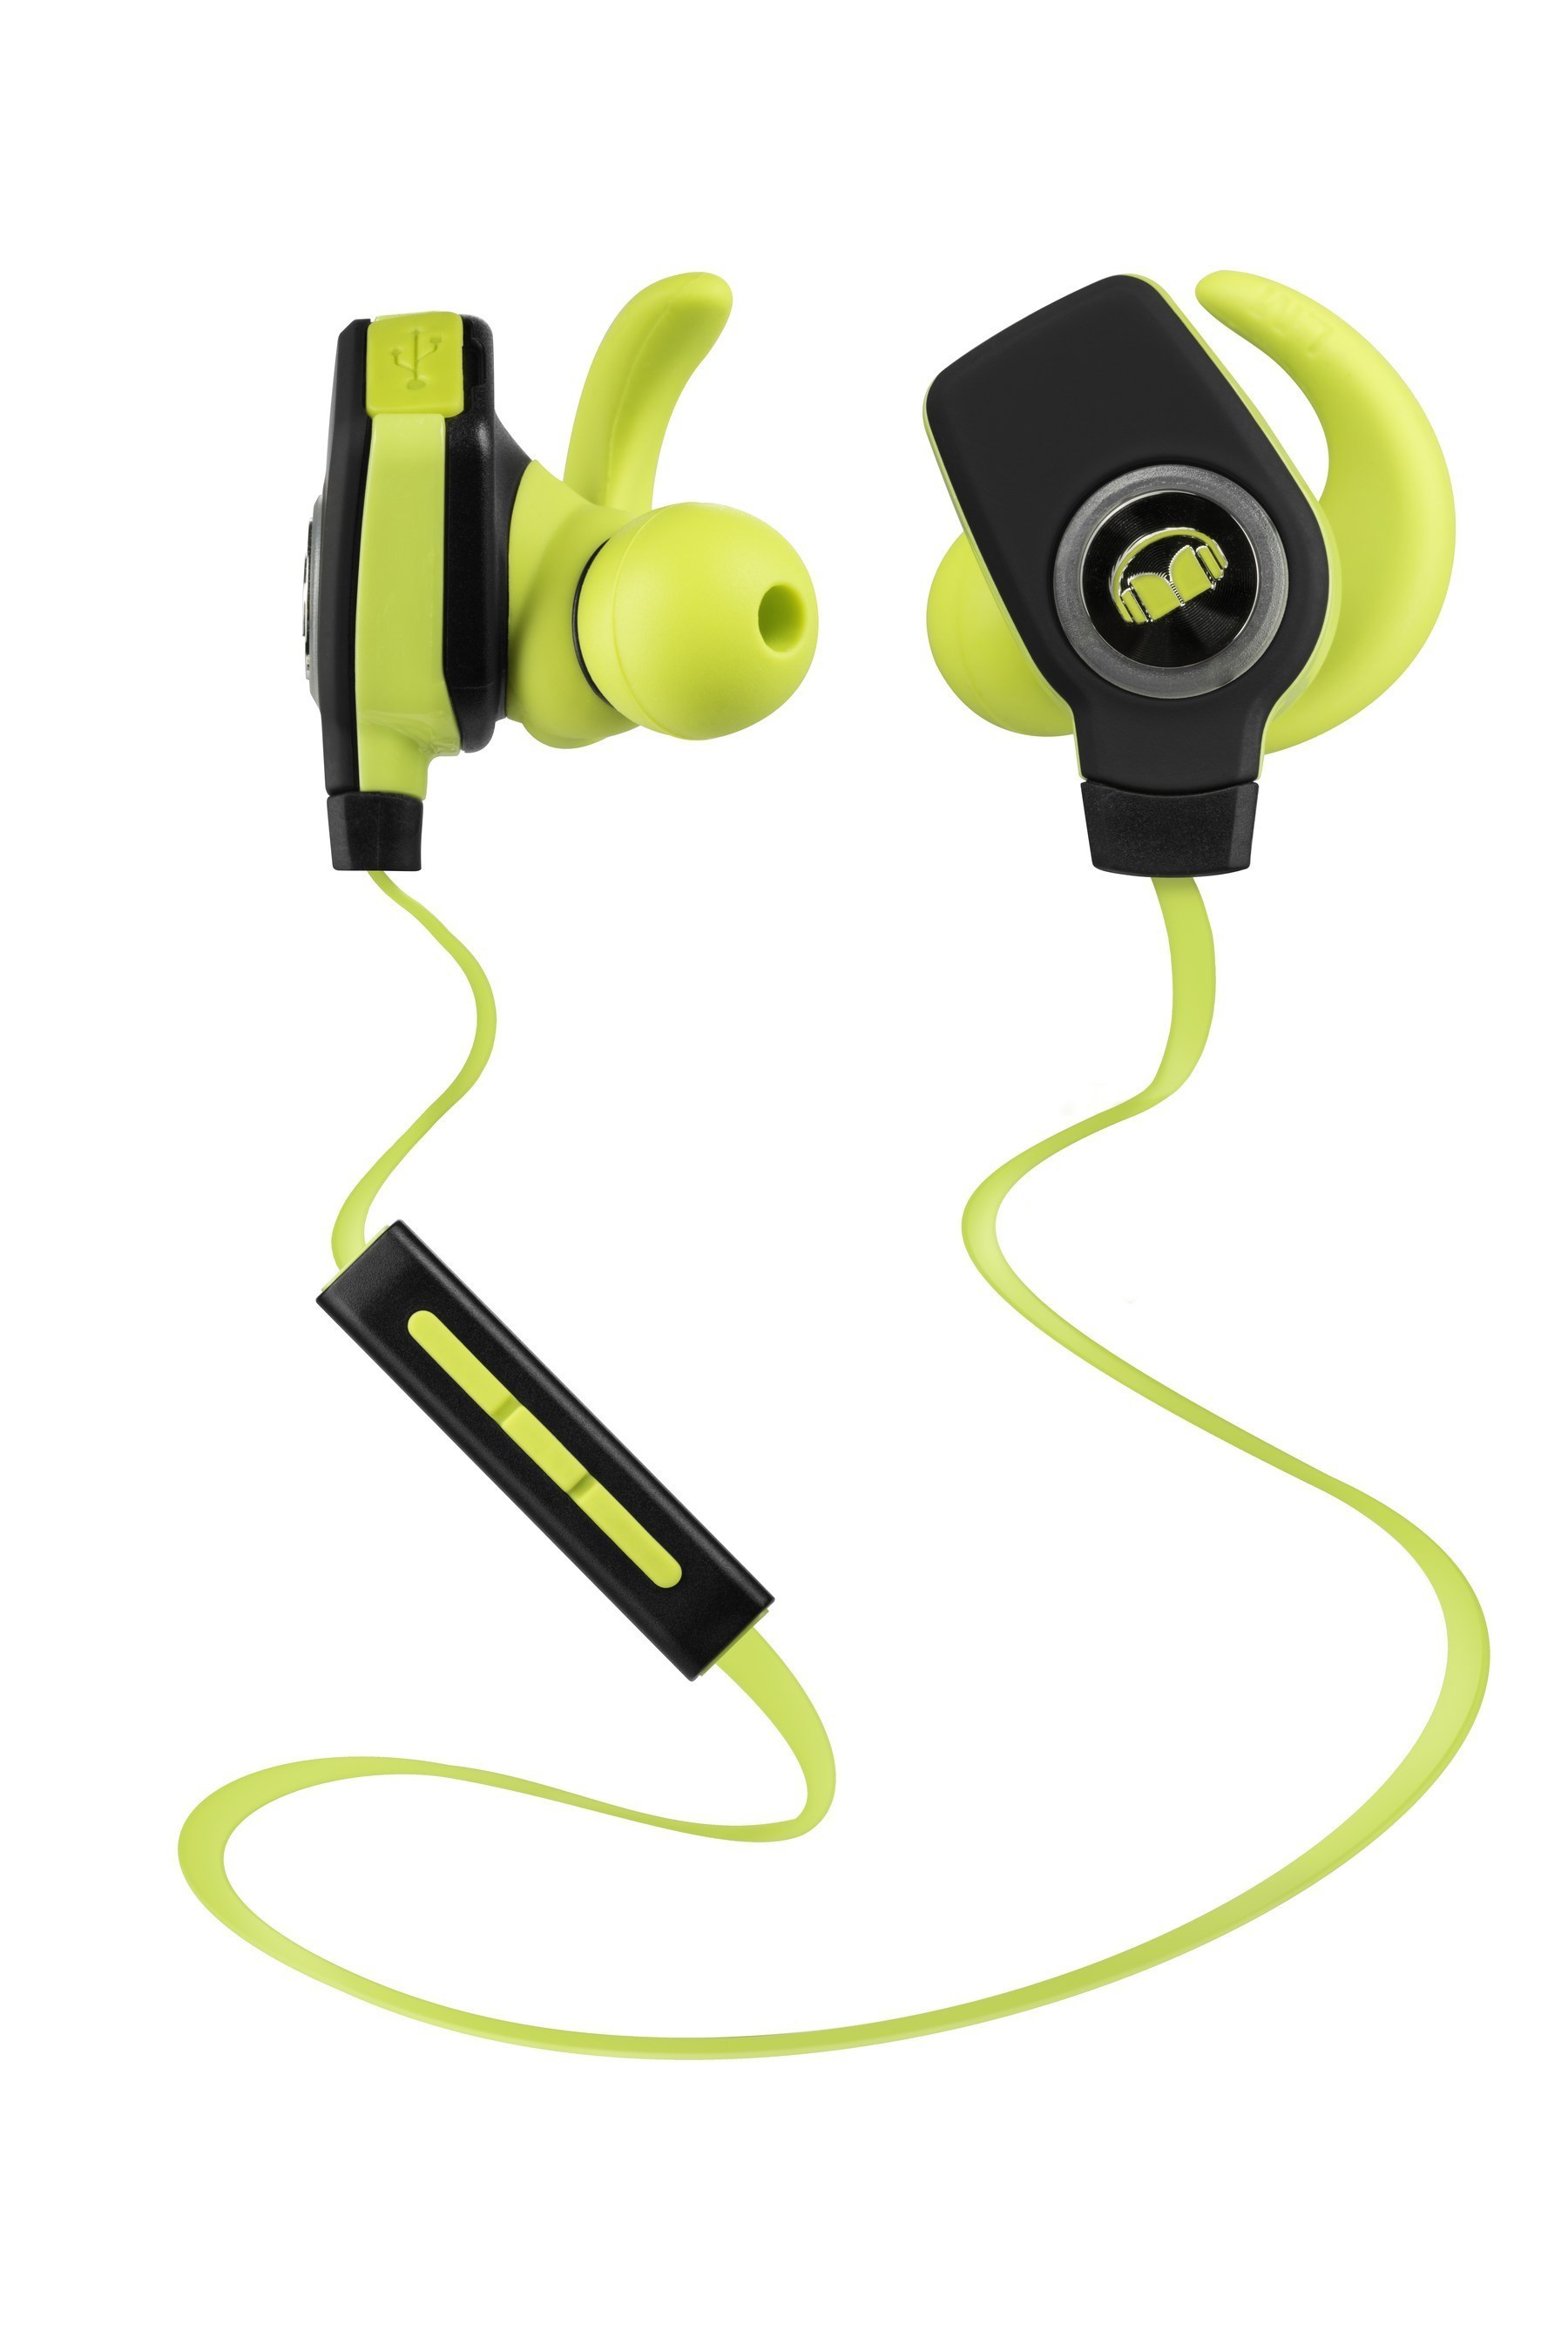 Monster created the World's thinnest, lightest and most versatile headphone for athletes. This was made possible by the integration of an innovative flat battery and folded circuit design. It is joined by the iSPORT(R) Bluetooth Wireless (SRP: $129.95), which also brings the powerful Monster music listening experience to virtually any tough workout routine. Both models are water resistant, so they are ideal for wearing on tough mountain trails or jogs through the park in ran or shine.